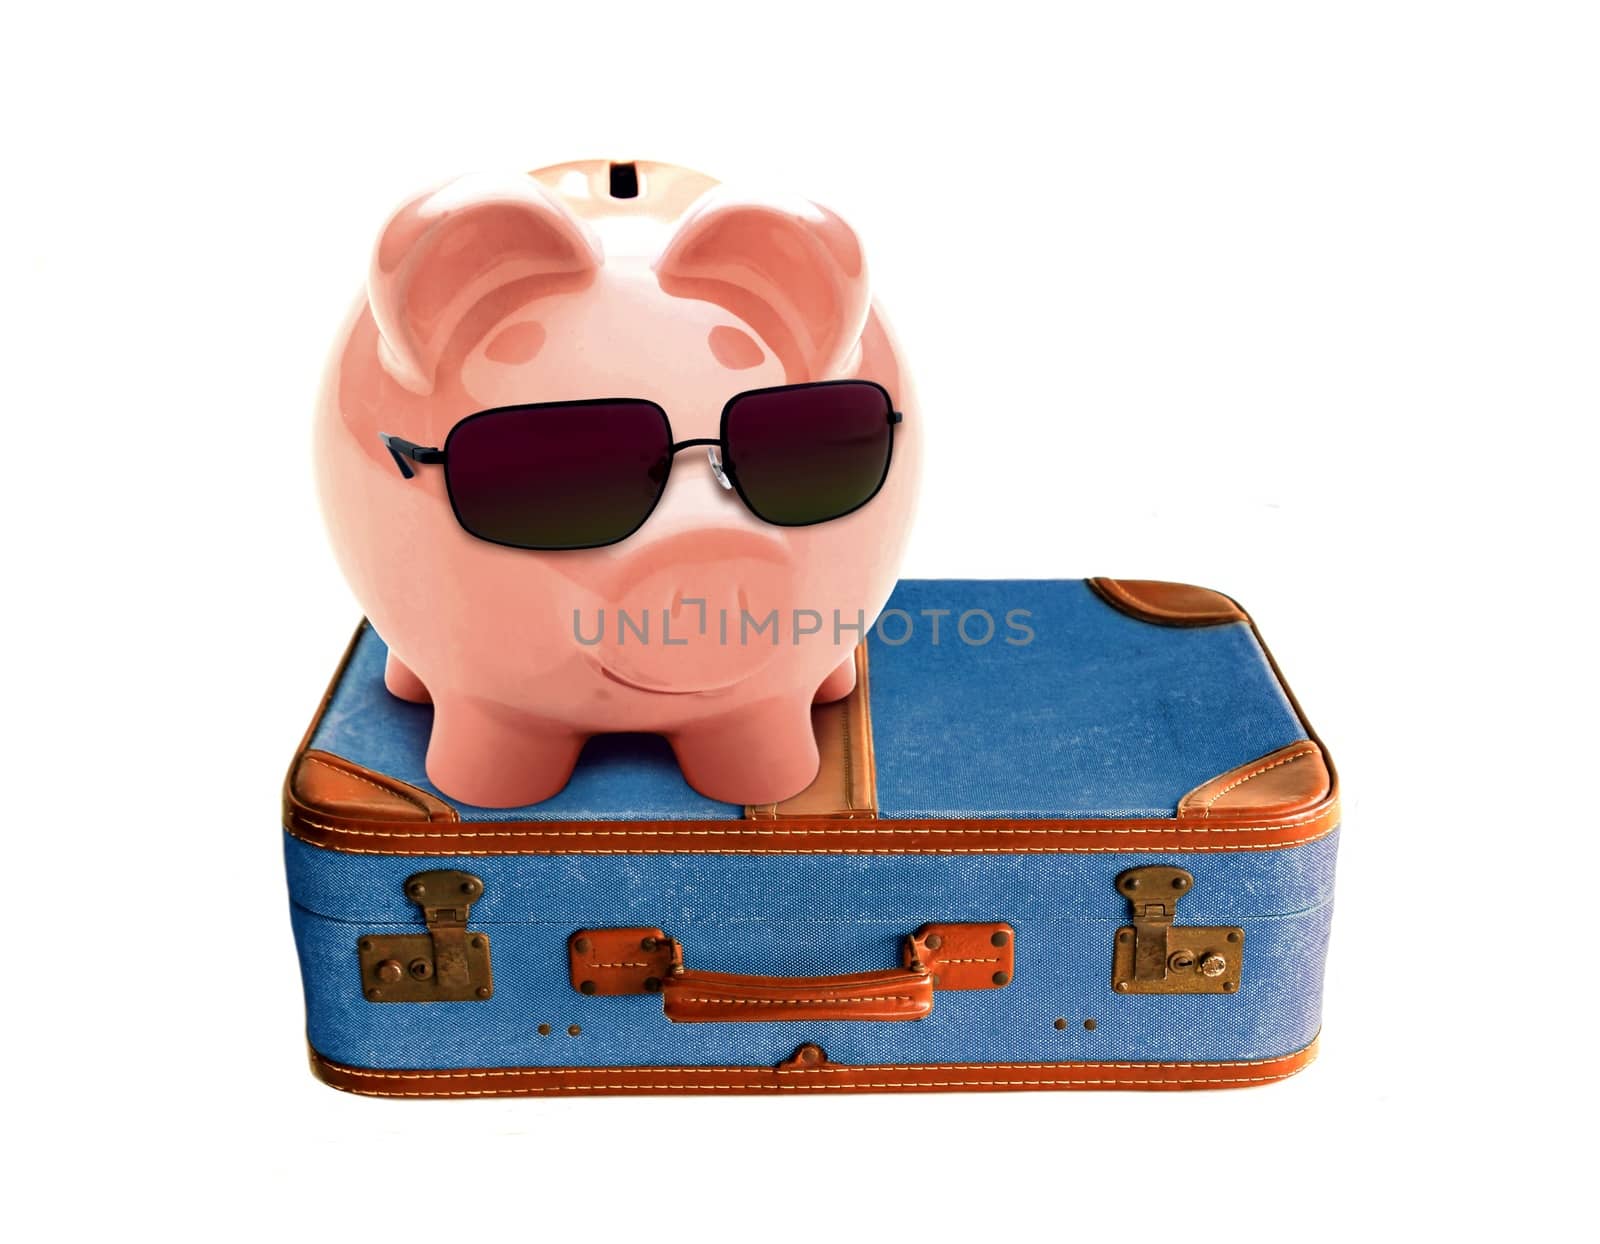 Piggy on Vacation by razihusin